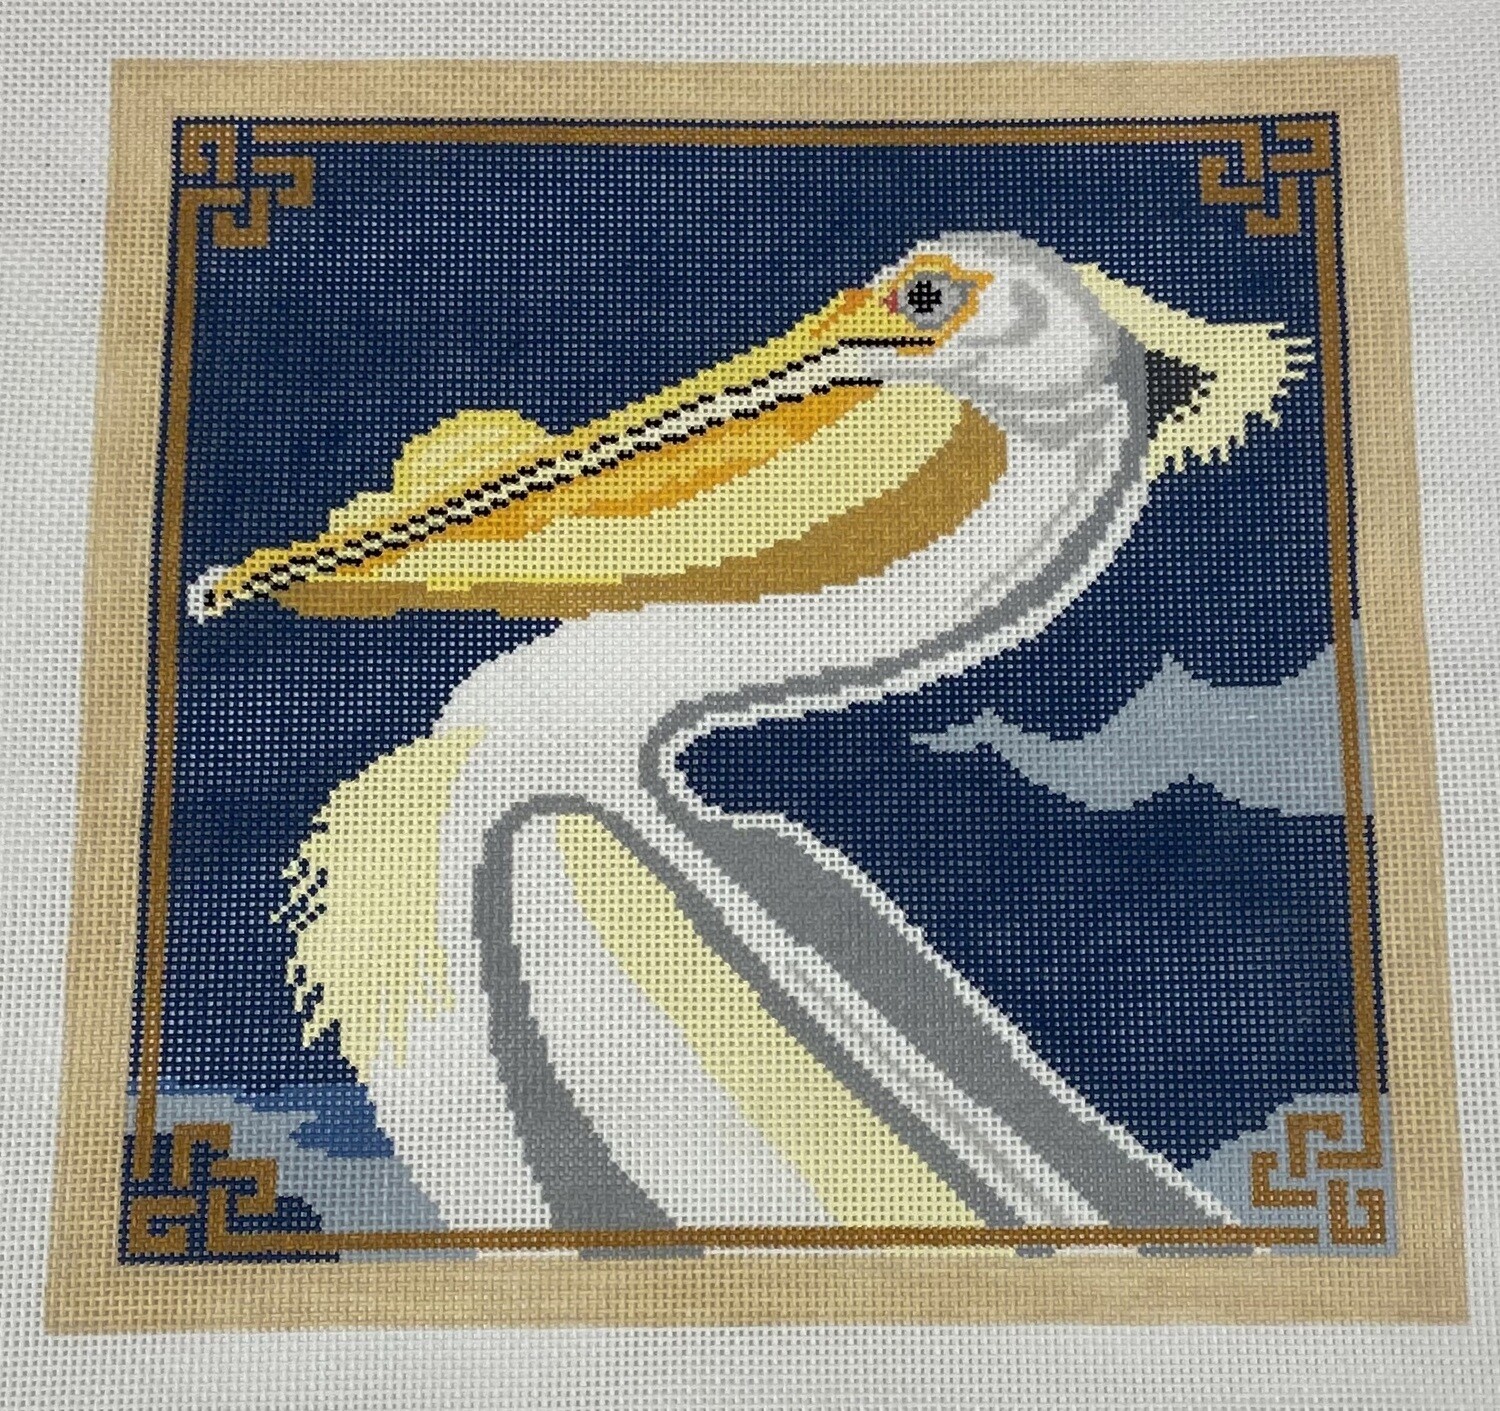 Audubon Pelican (Handpainted by Blueberry Point)